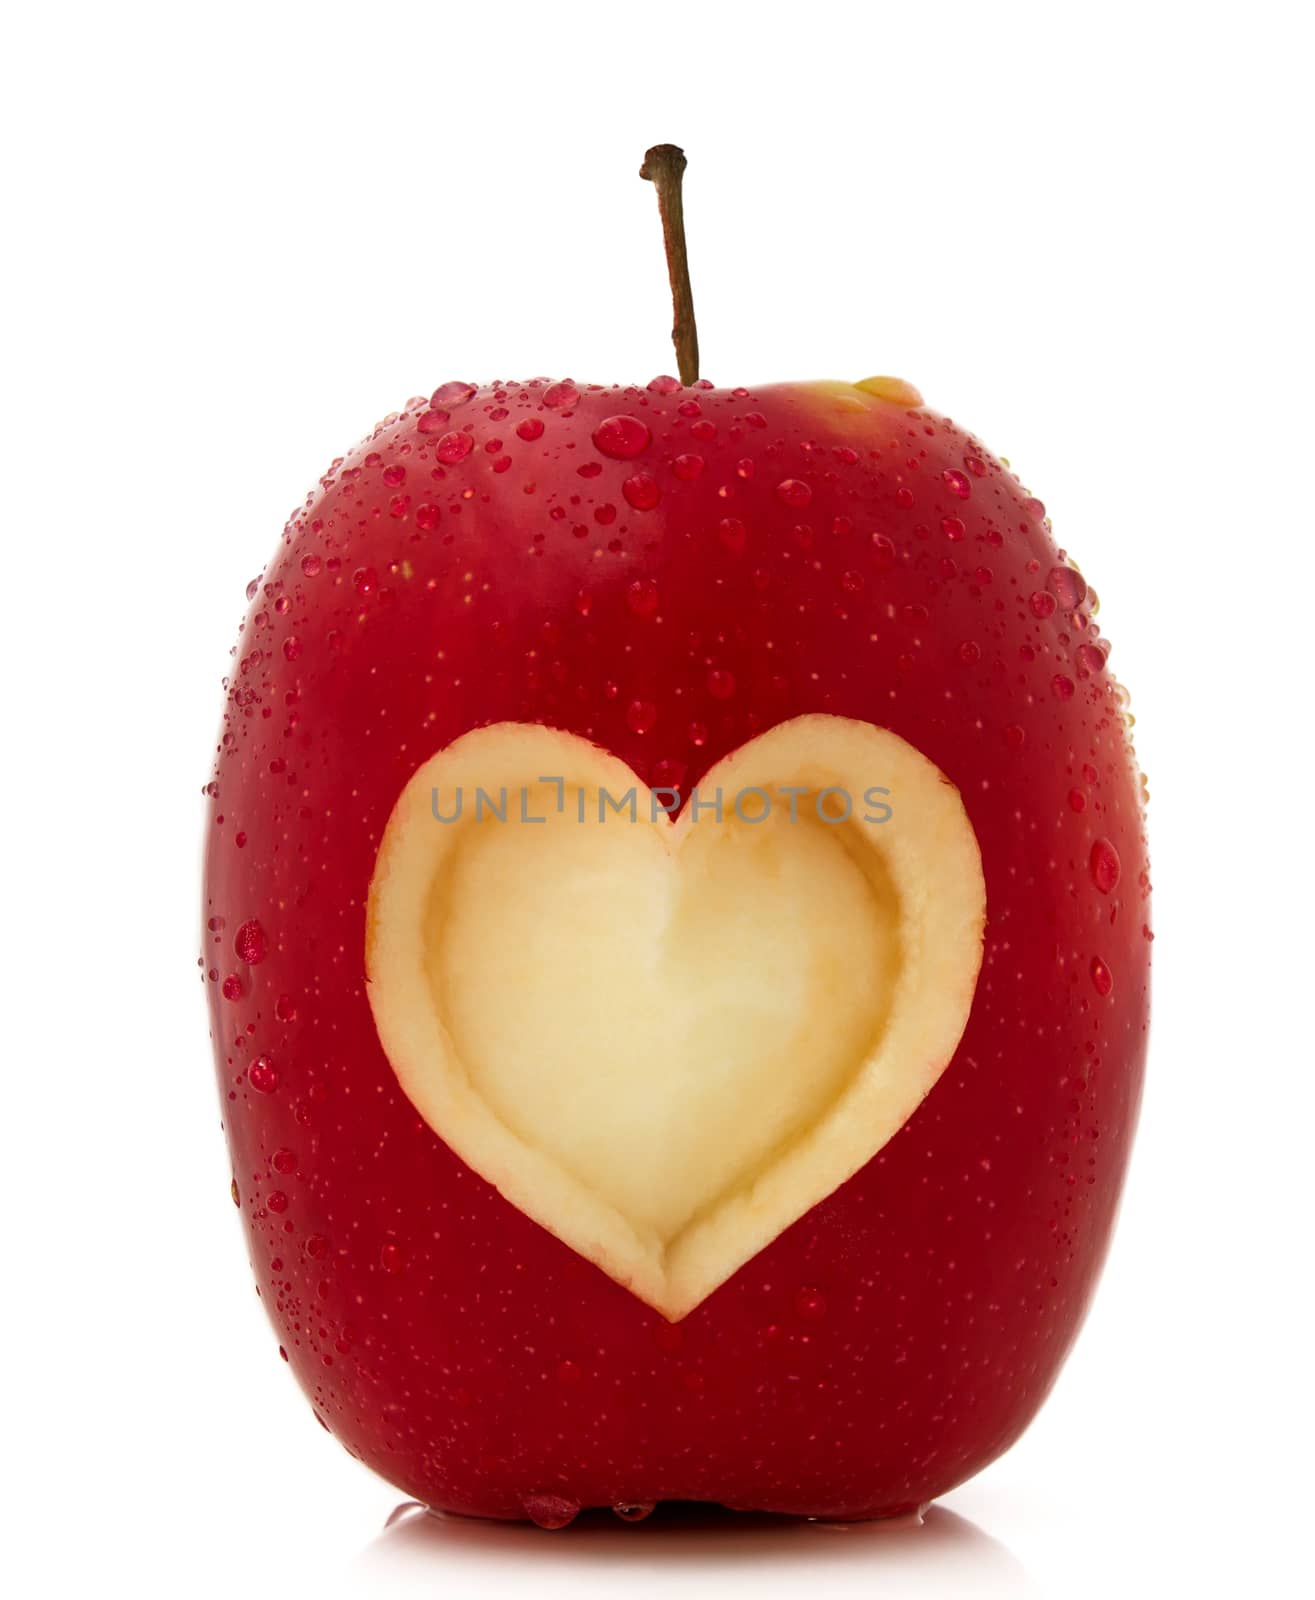 Red apple with a heart symbol isolated on white background